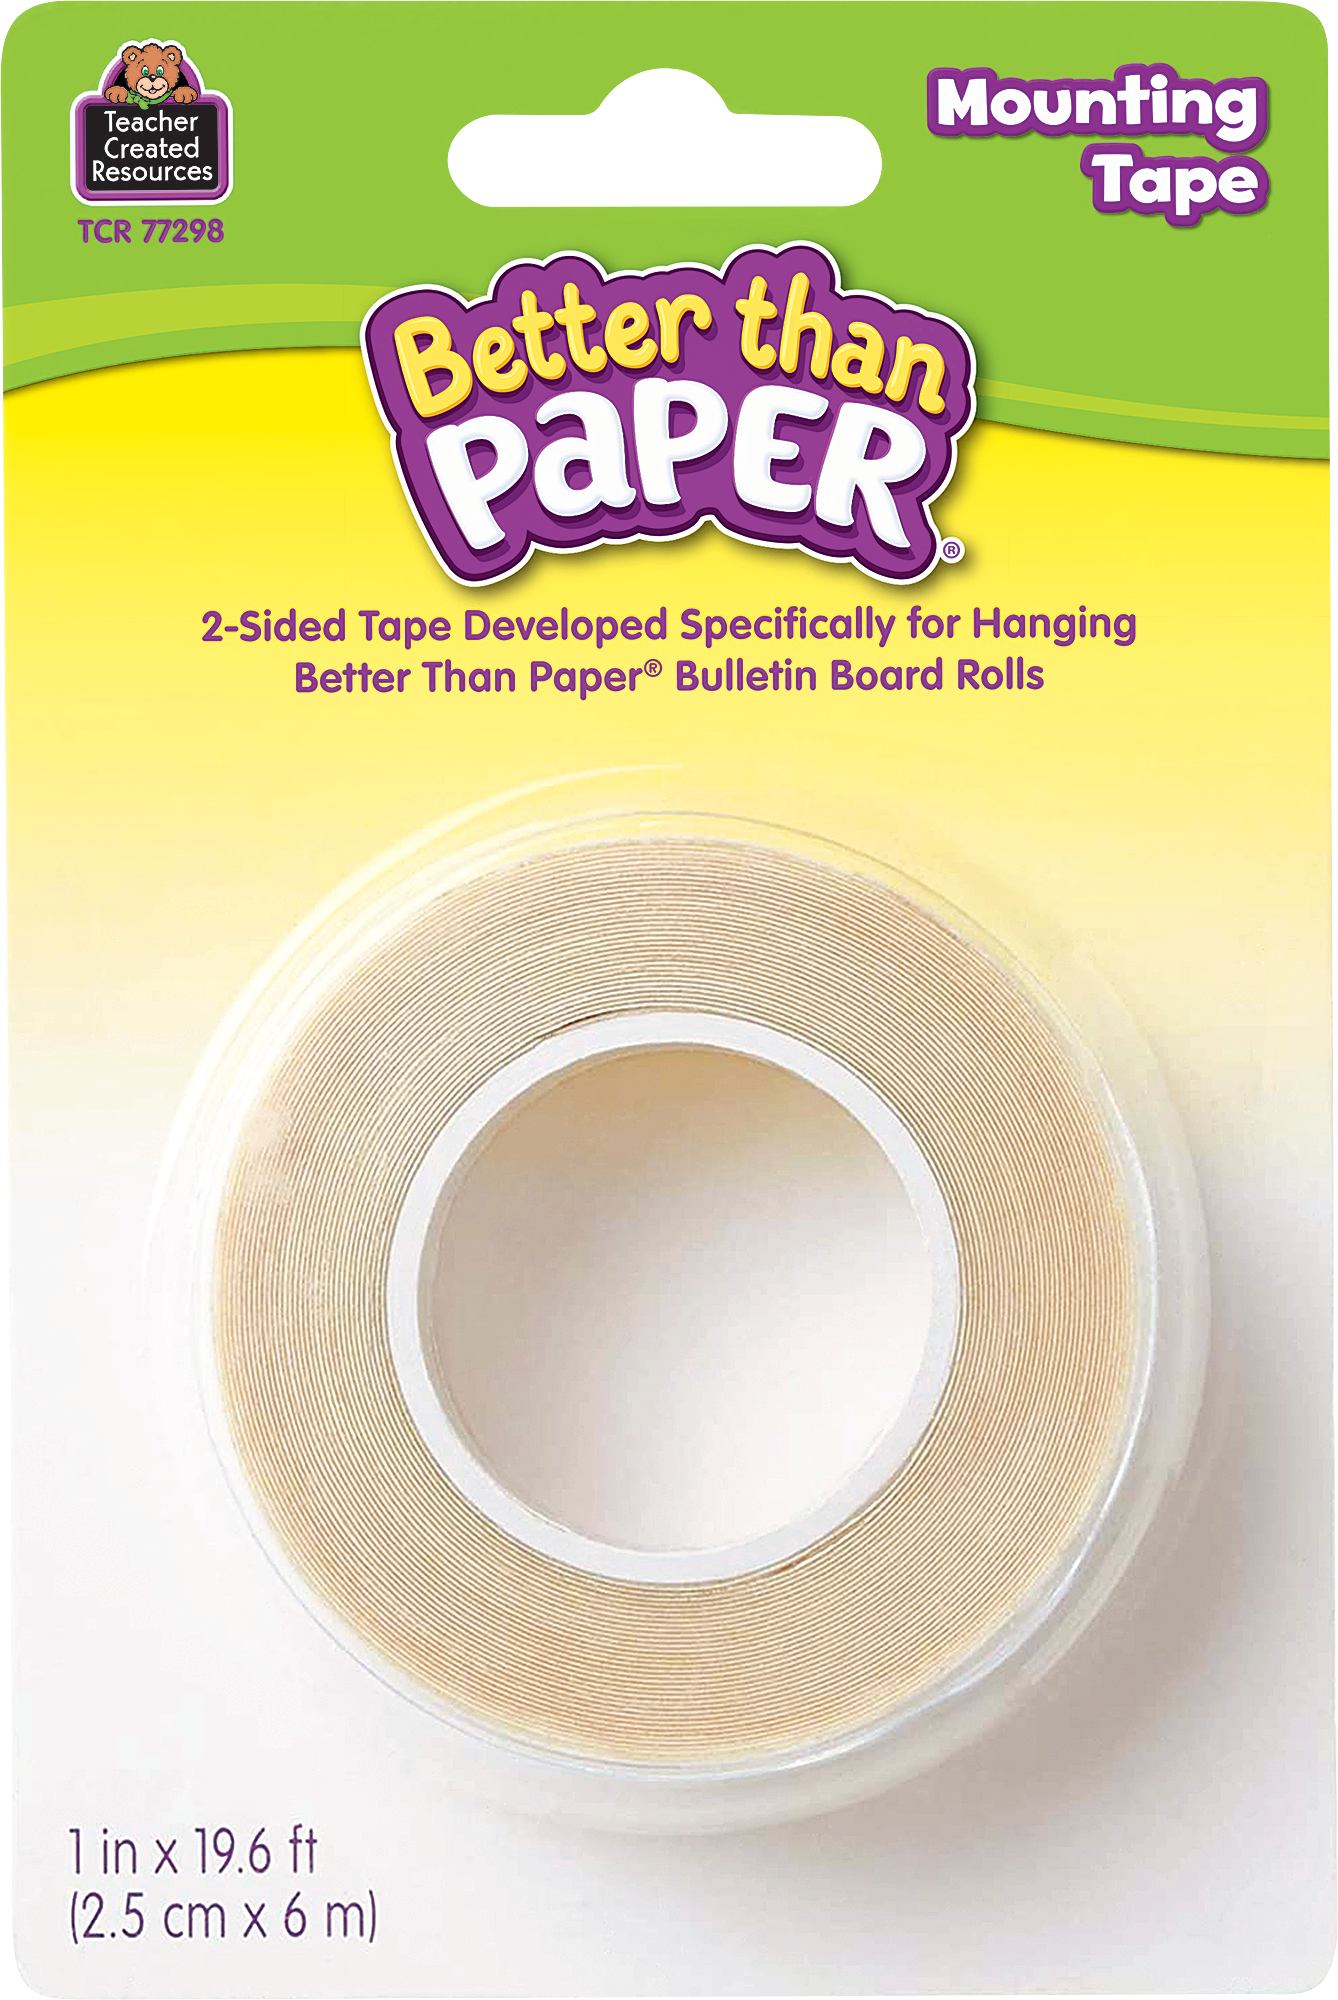 Better Than Paper Mounting Tape - TCR77298